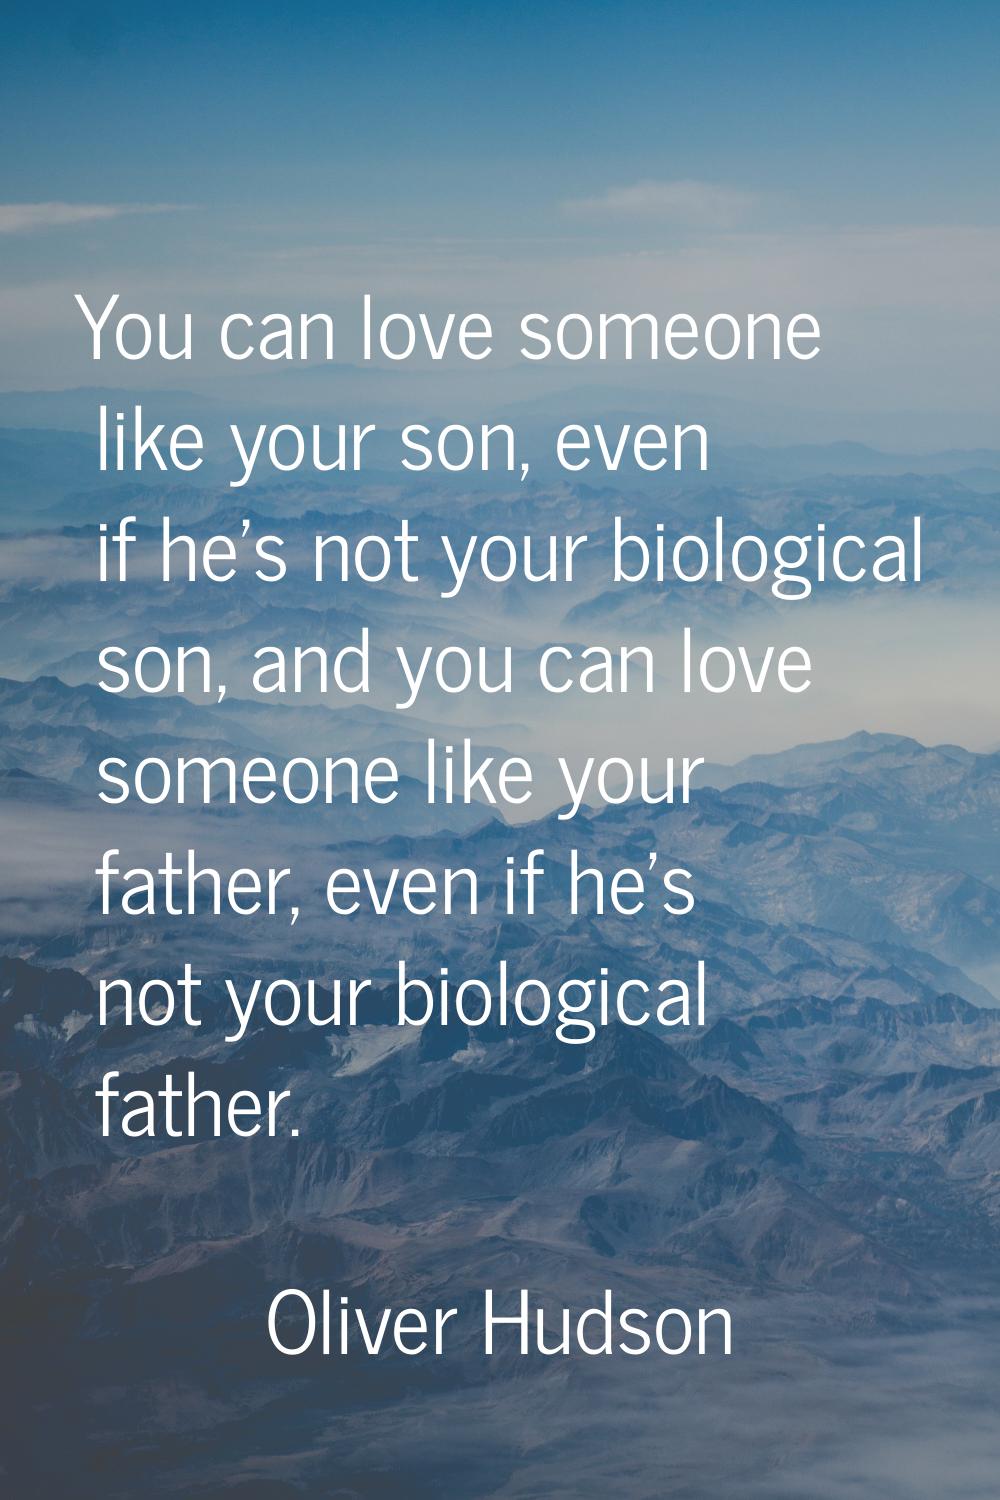 You can love someone like your son, even if he's not your biological son, and you can love someone 